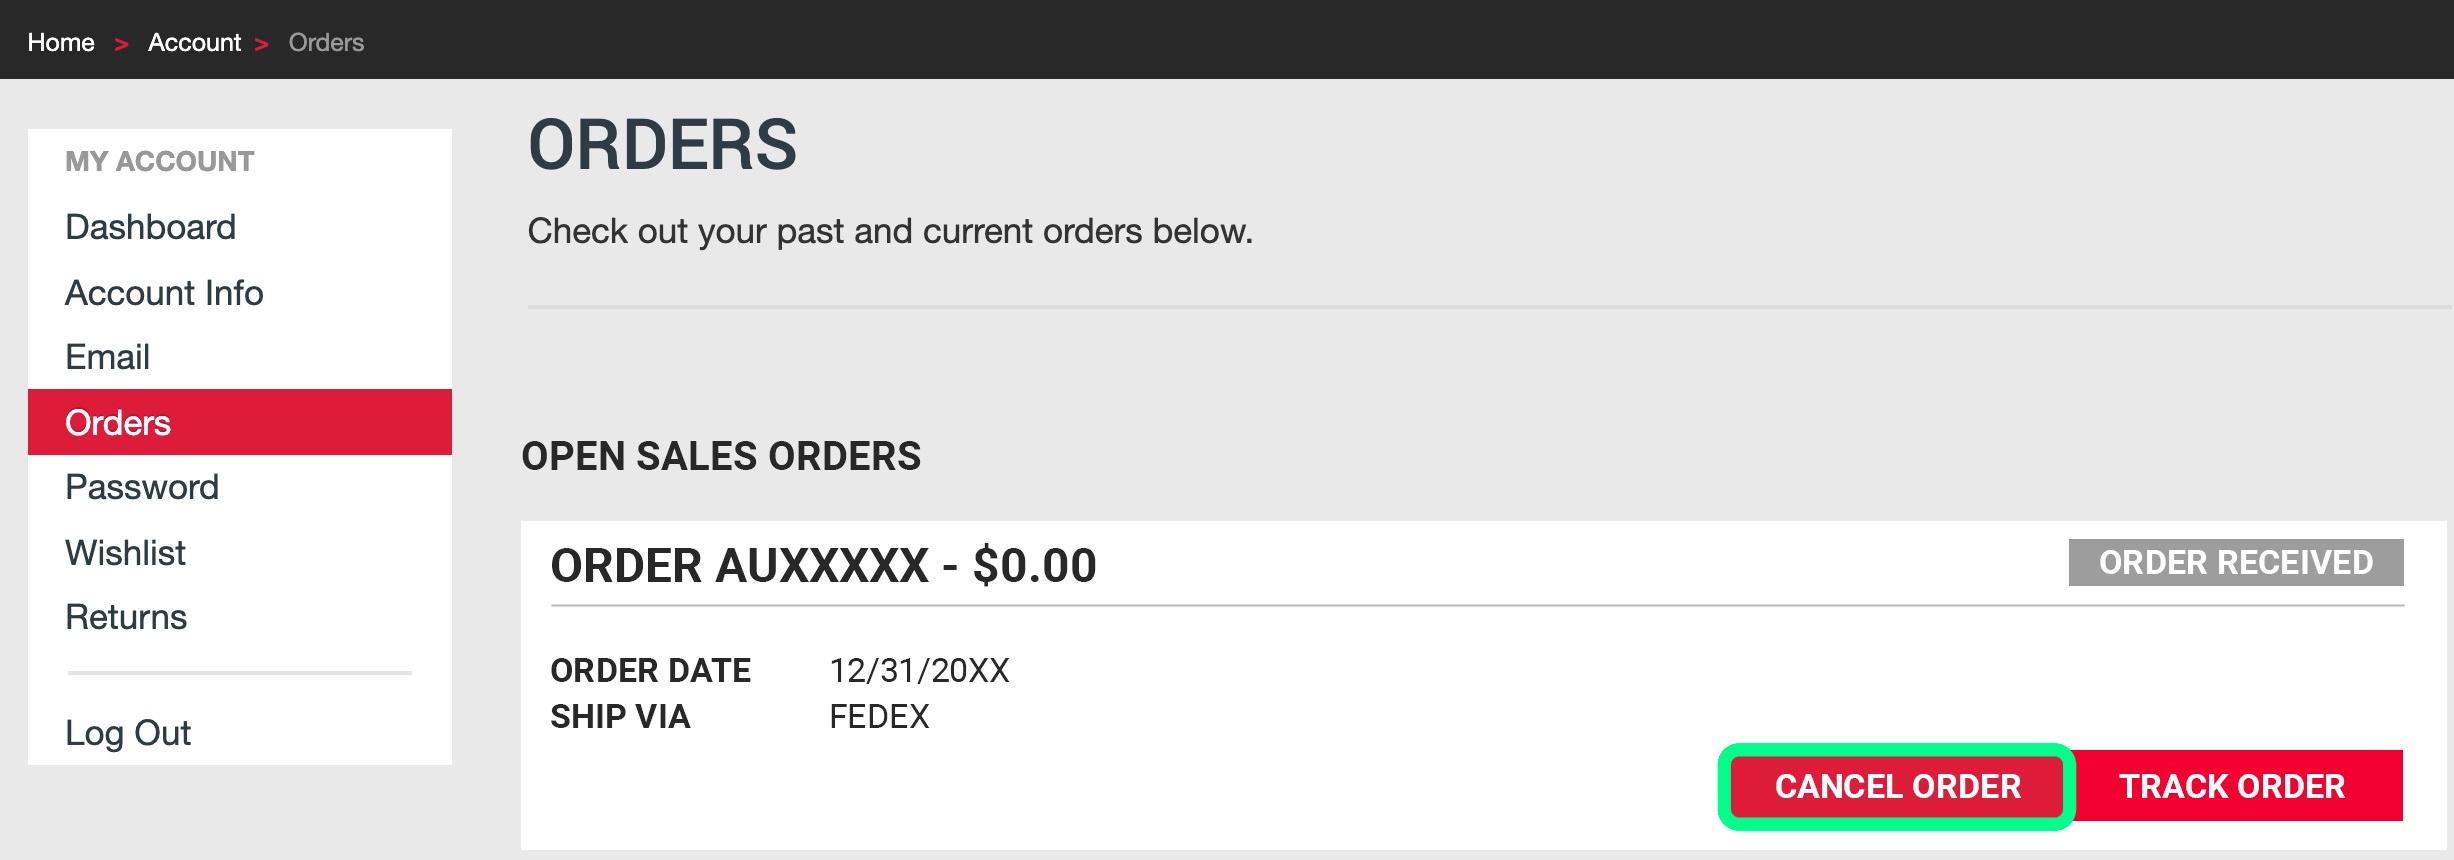 How to Cancel My Order With LMR - step 2